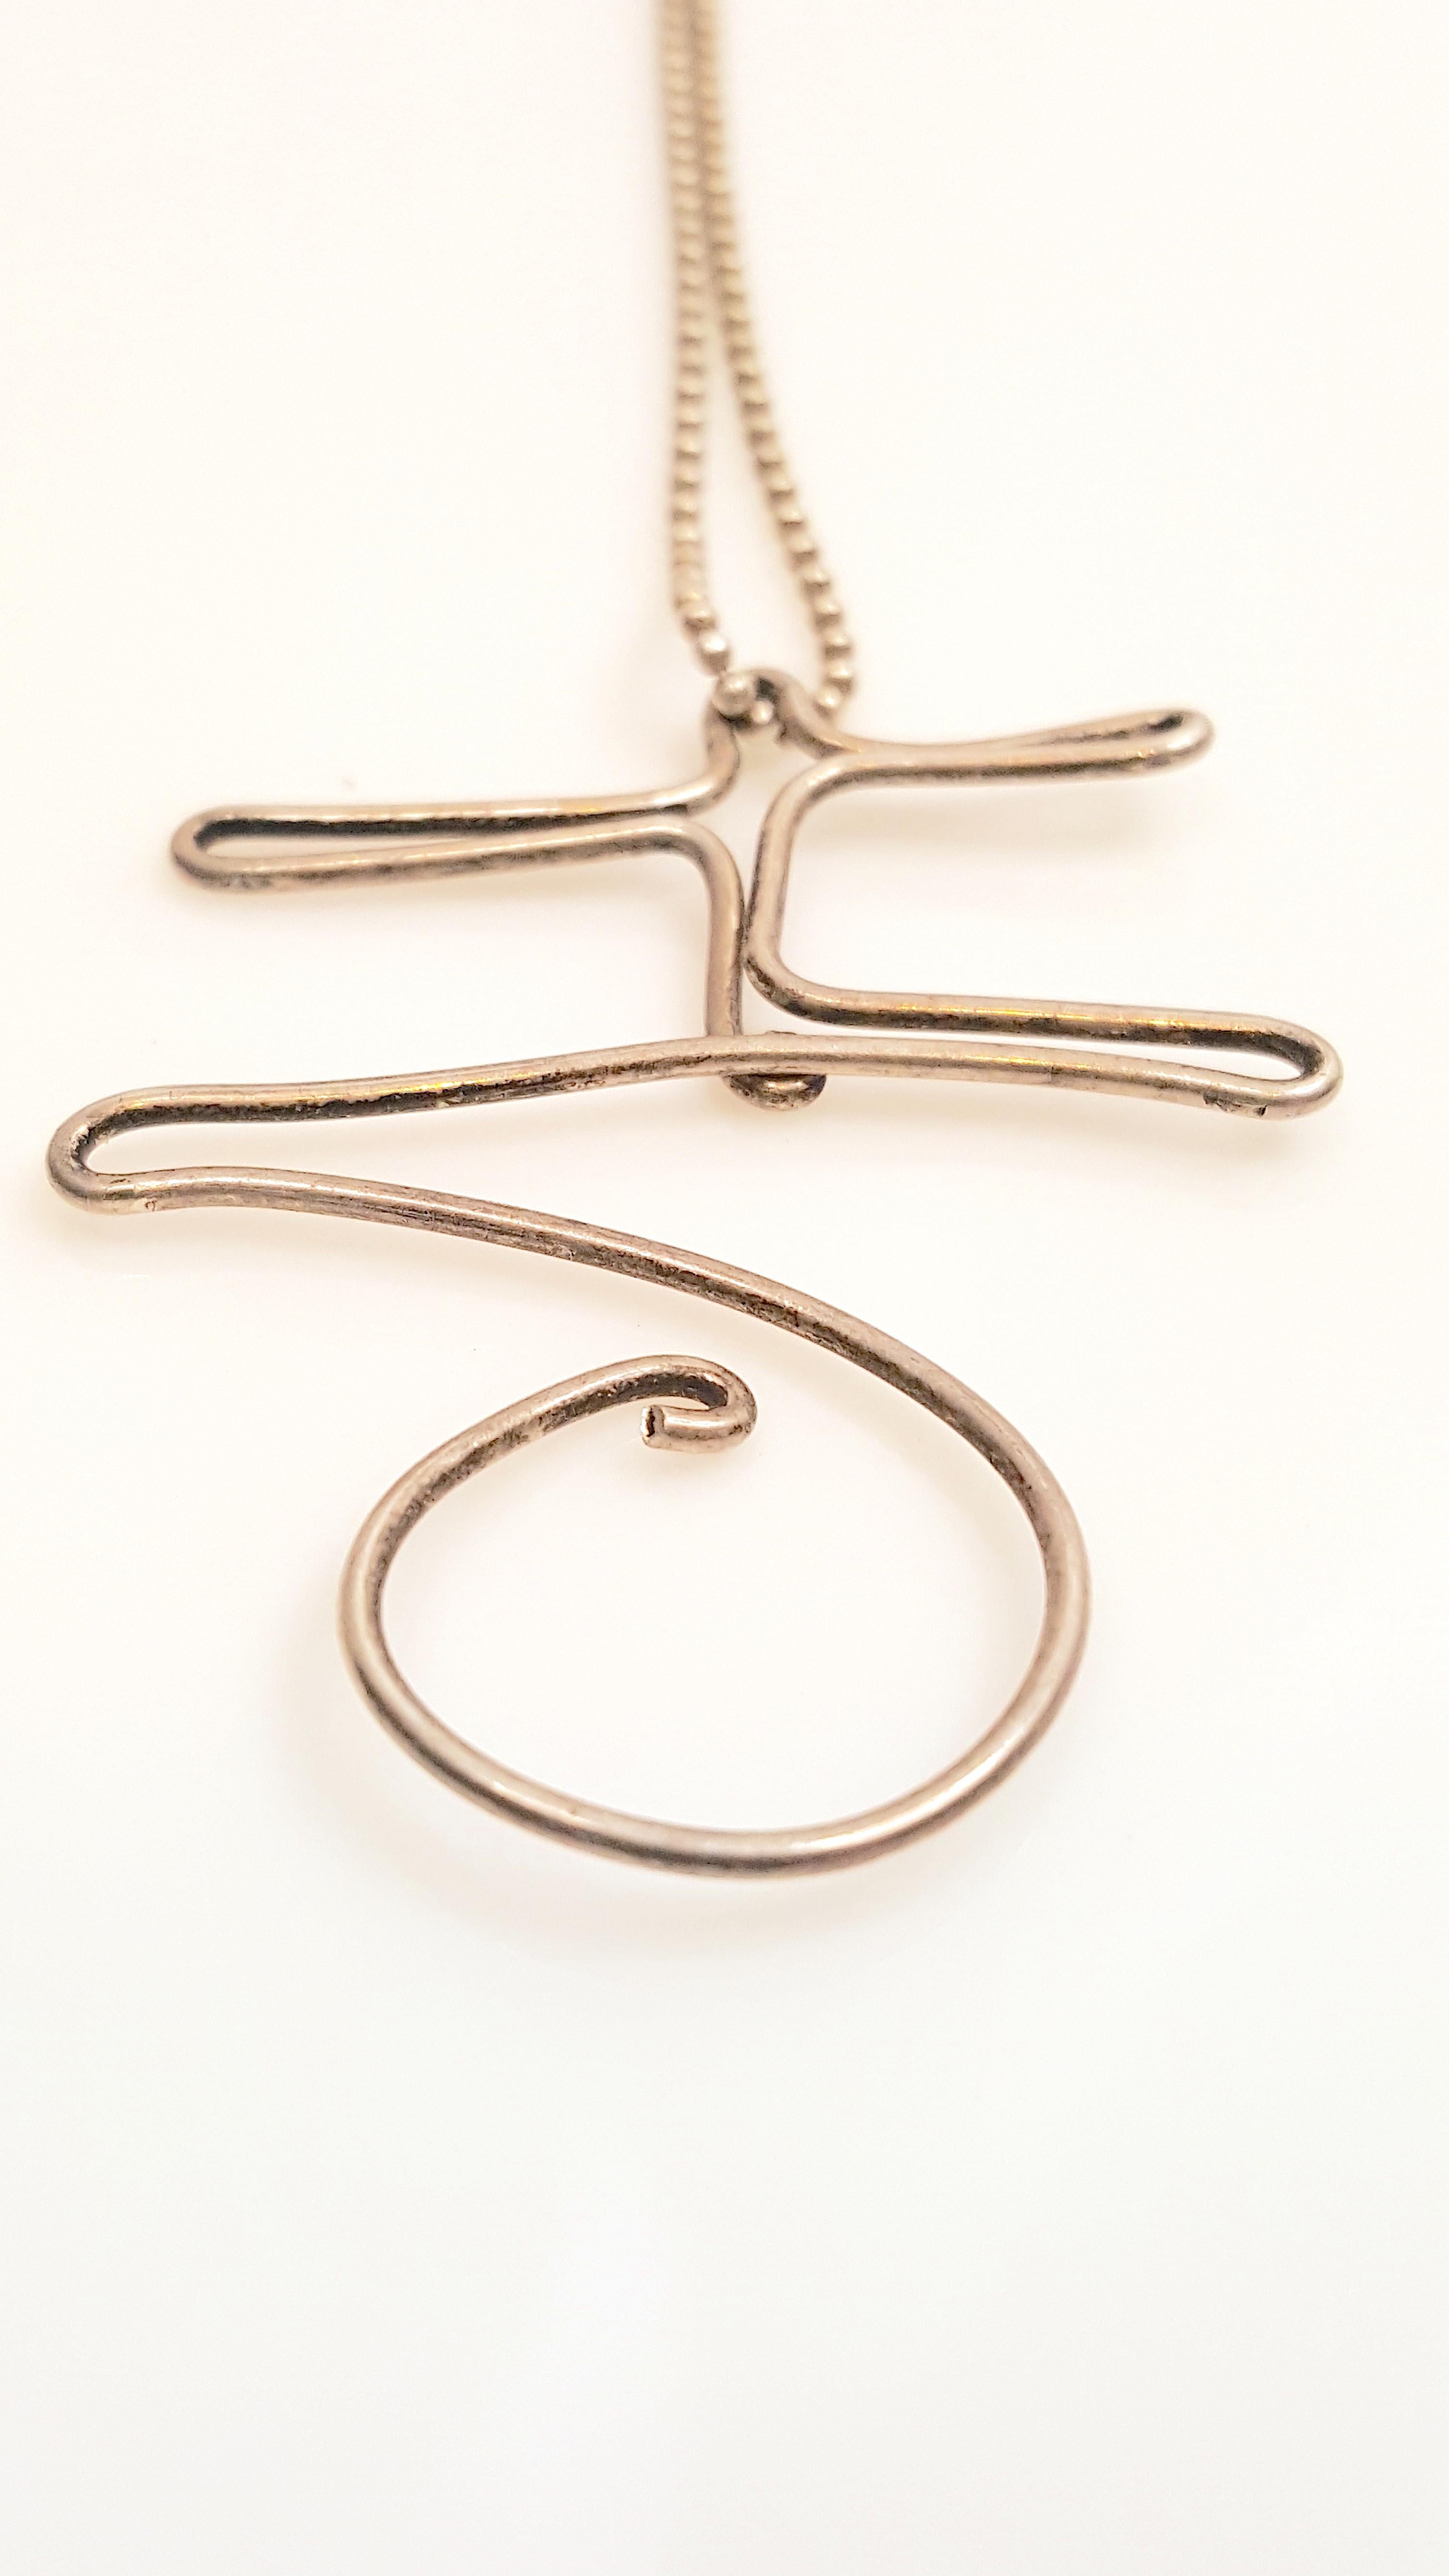 Like Alexander Calder's handmade wire jewelry since 1929, whose smallest one-of-a-kind sculptural subjects ranged from aerial acrobats and dancers to monograms with letters representing a friend, this modern minimal sterling-silver wire pendant was